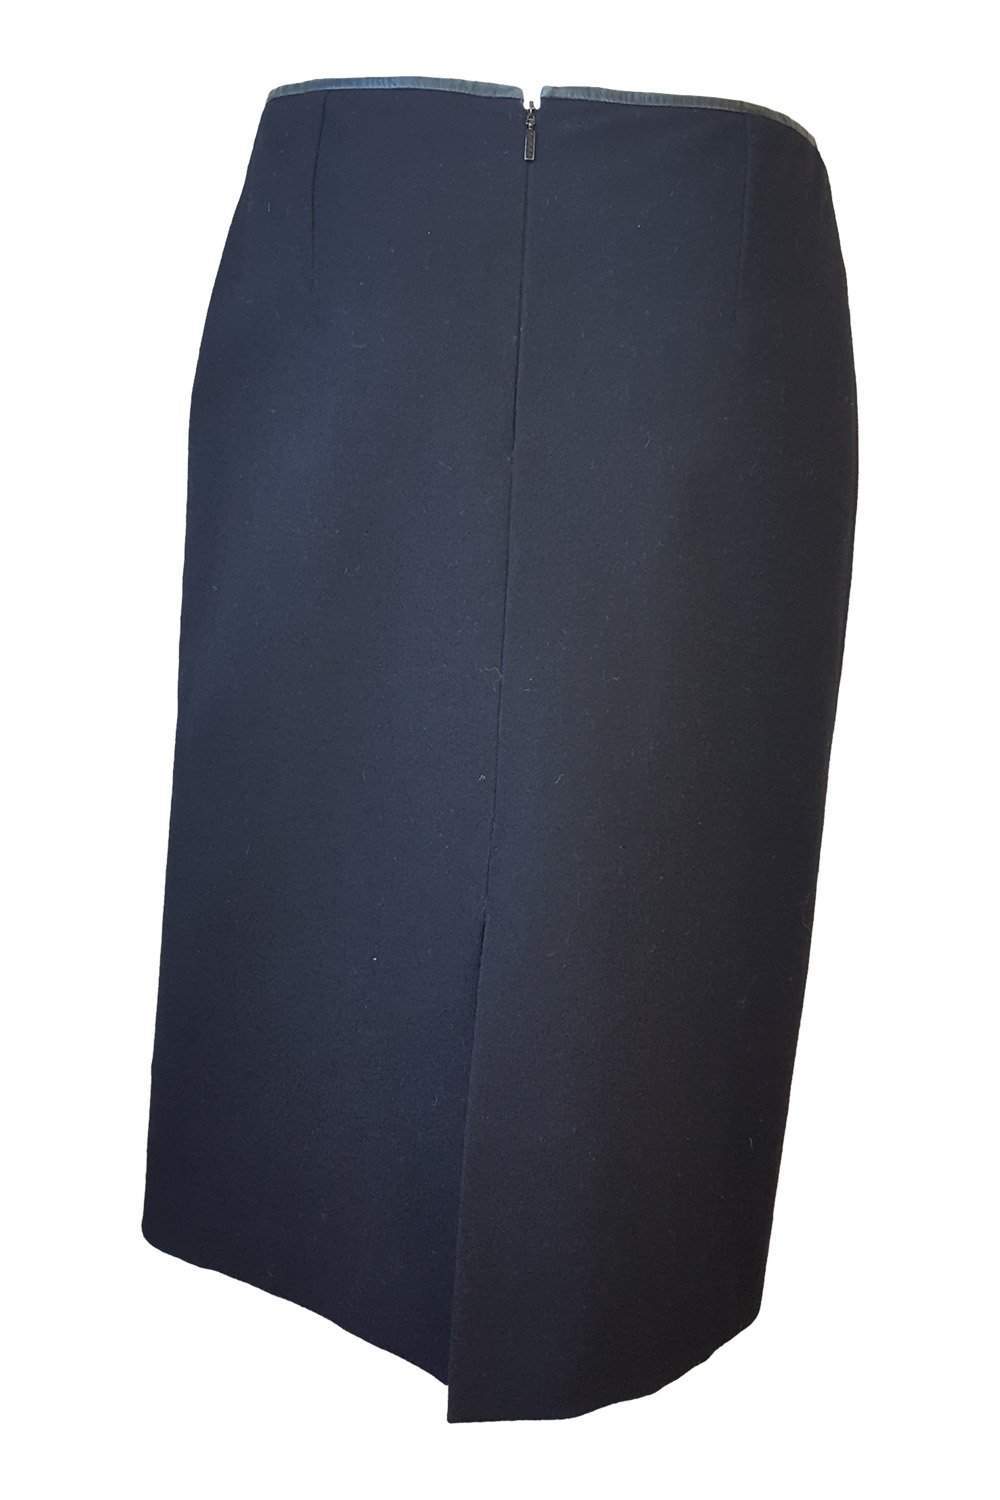 GUCCI Black Wool and Leather Trim Pencil Skirt (42)-Gucci-The Freperie